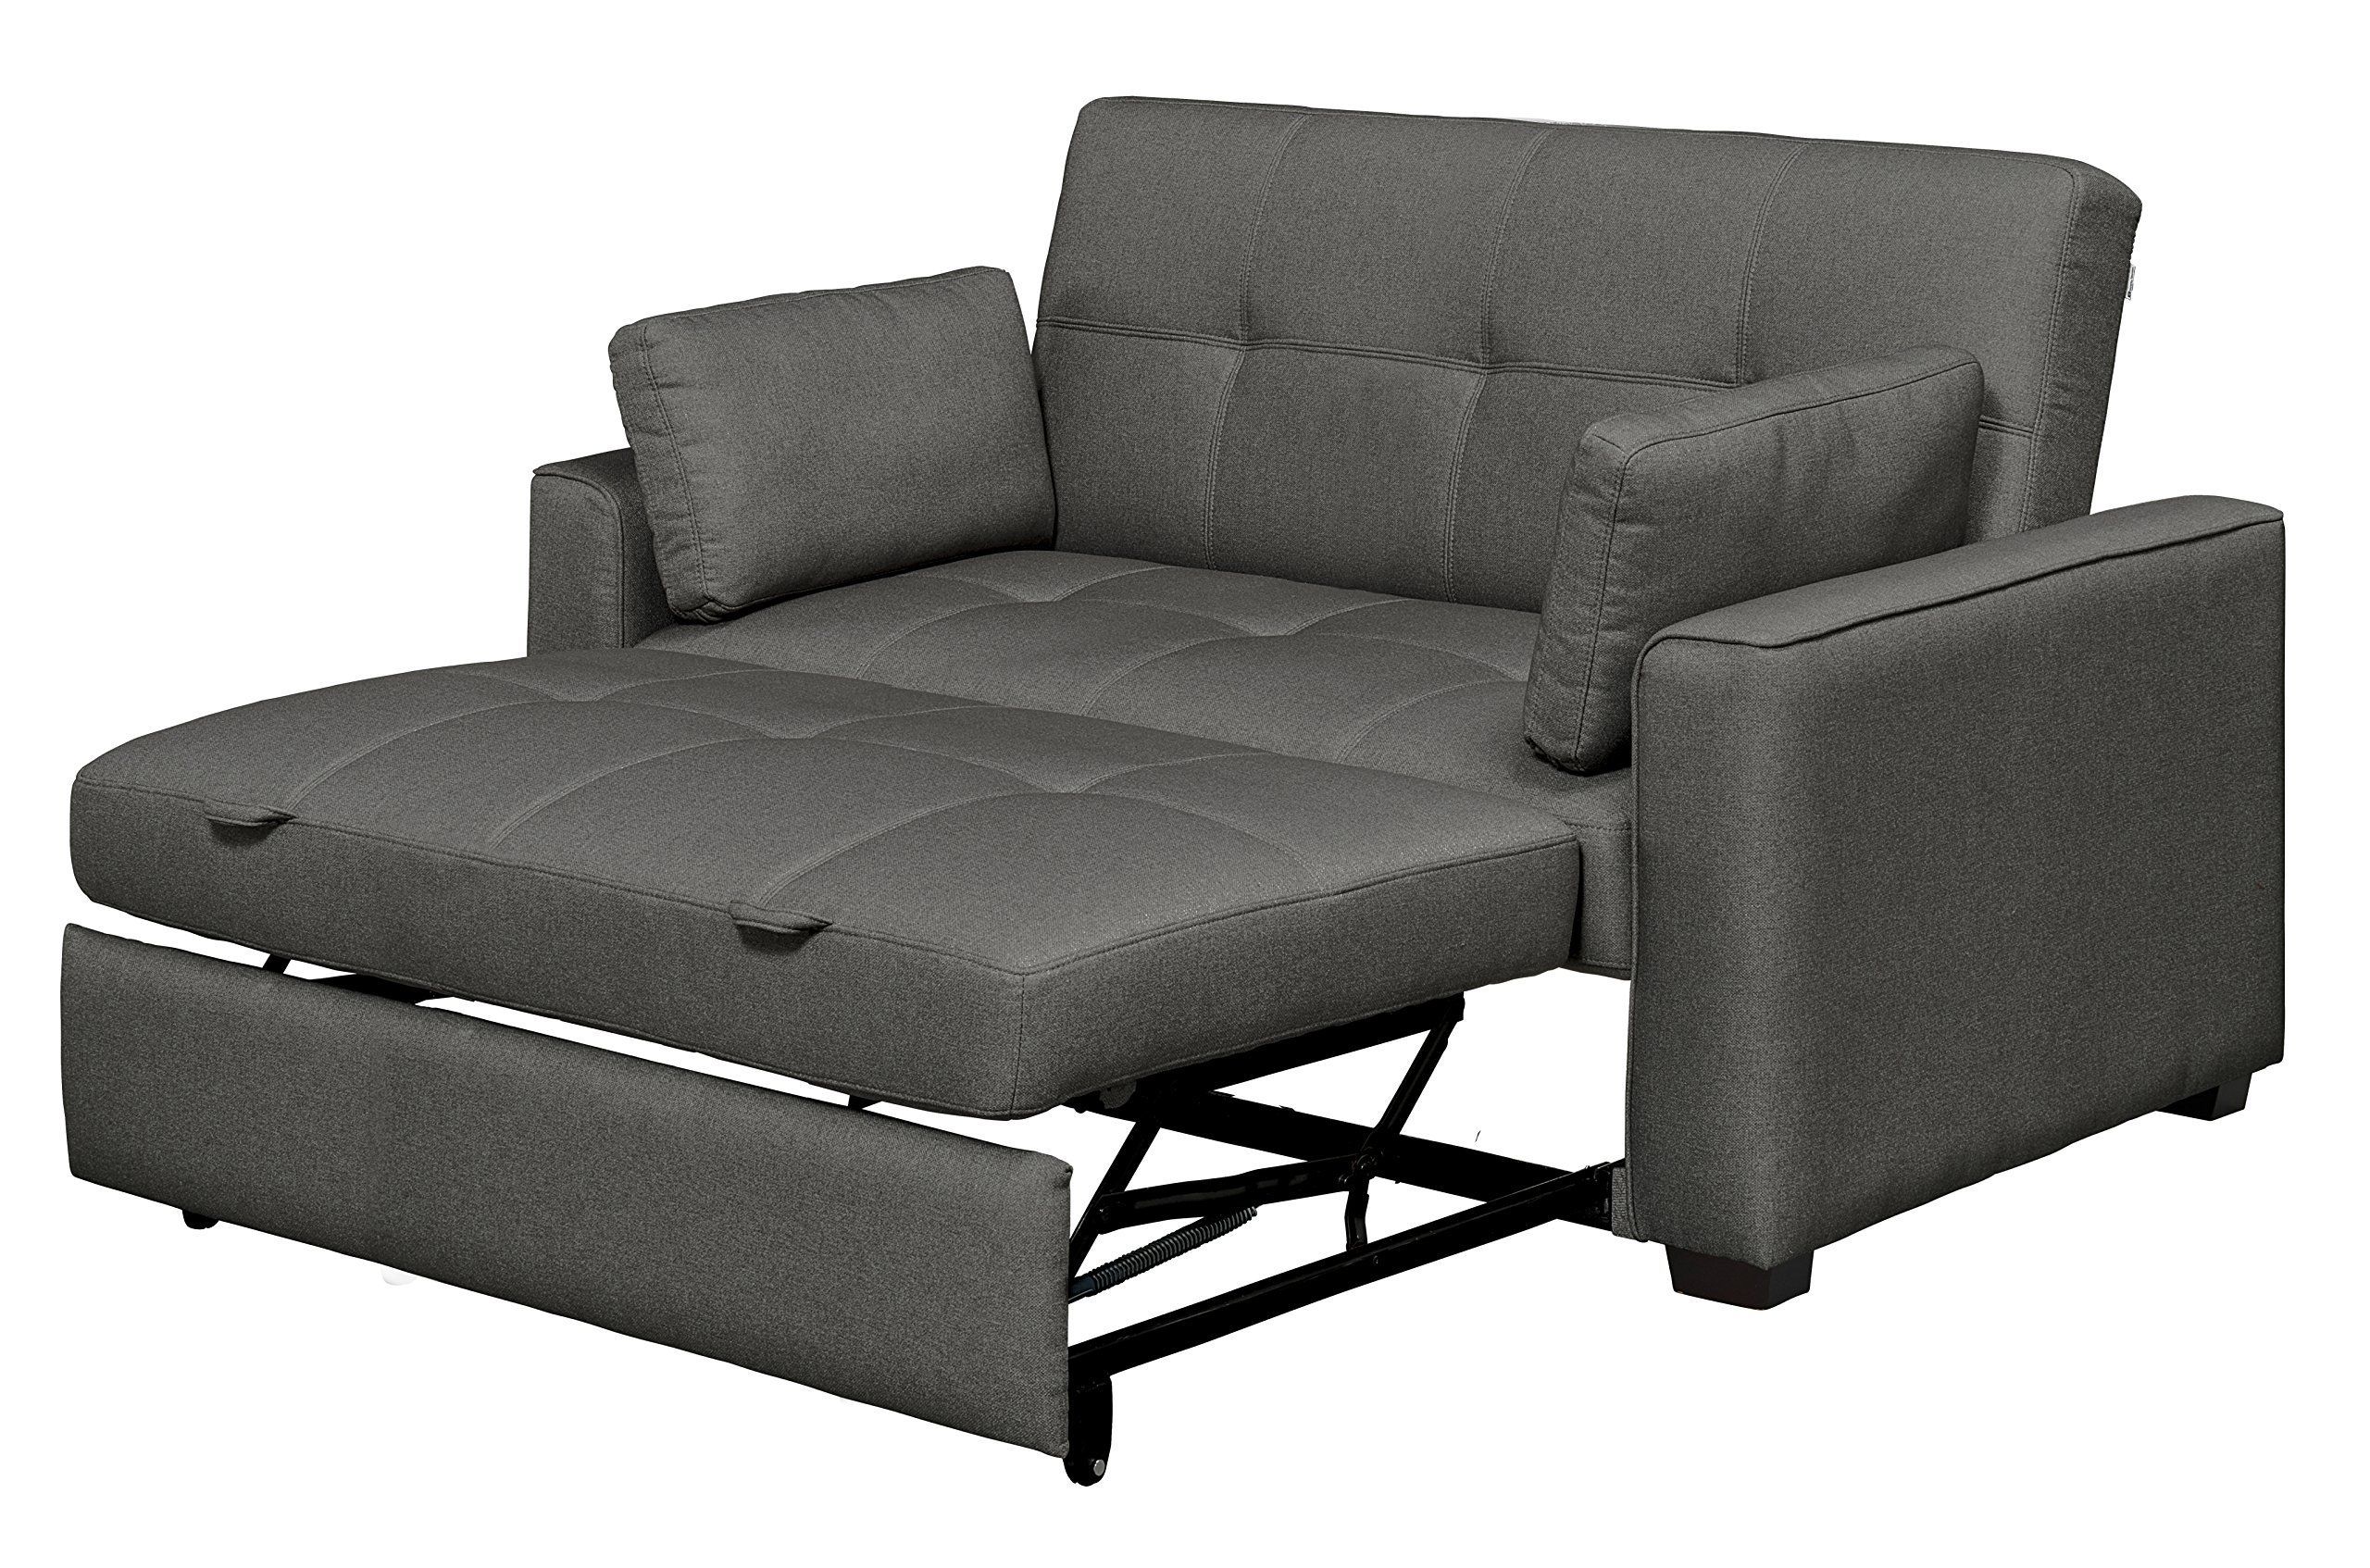 Mechali Products Furniture Serta Sofa Sleeper Convertible Into Lounger Throughout Convertible Gray Loveseat Sleepers (Gallery 5 of 20)